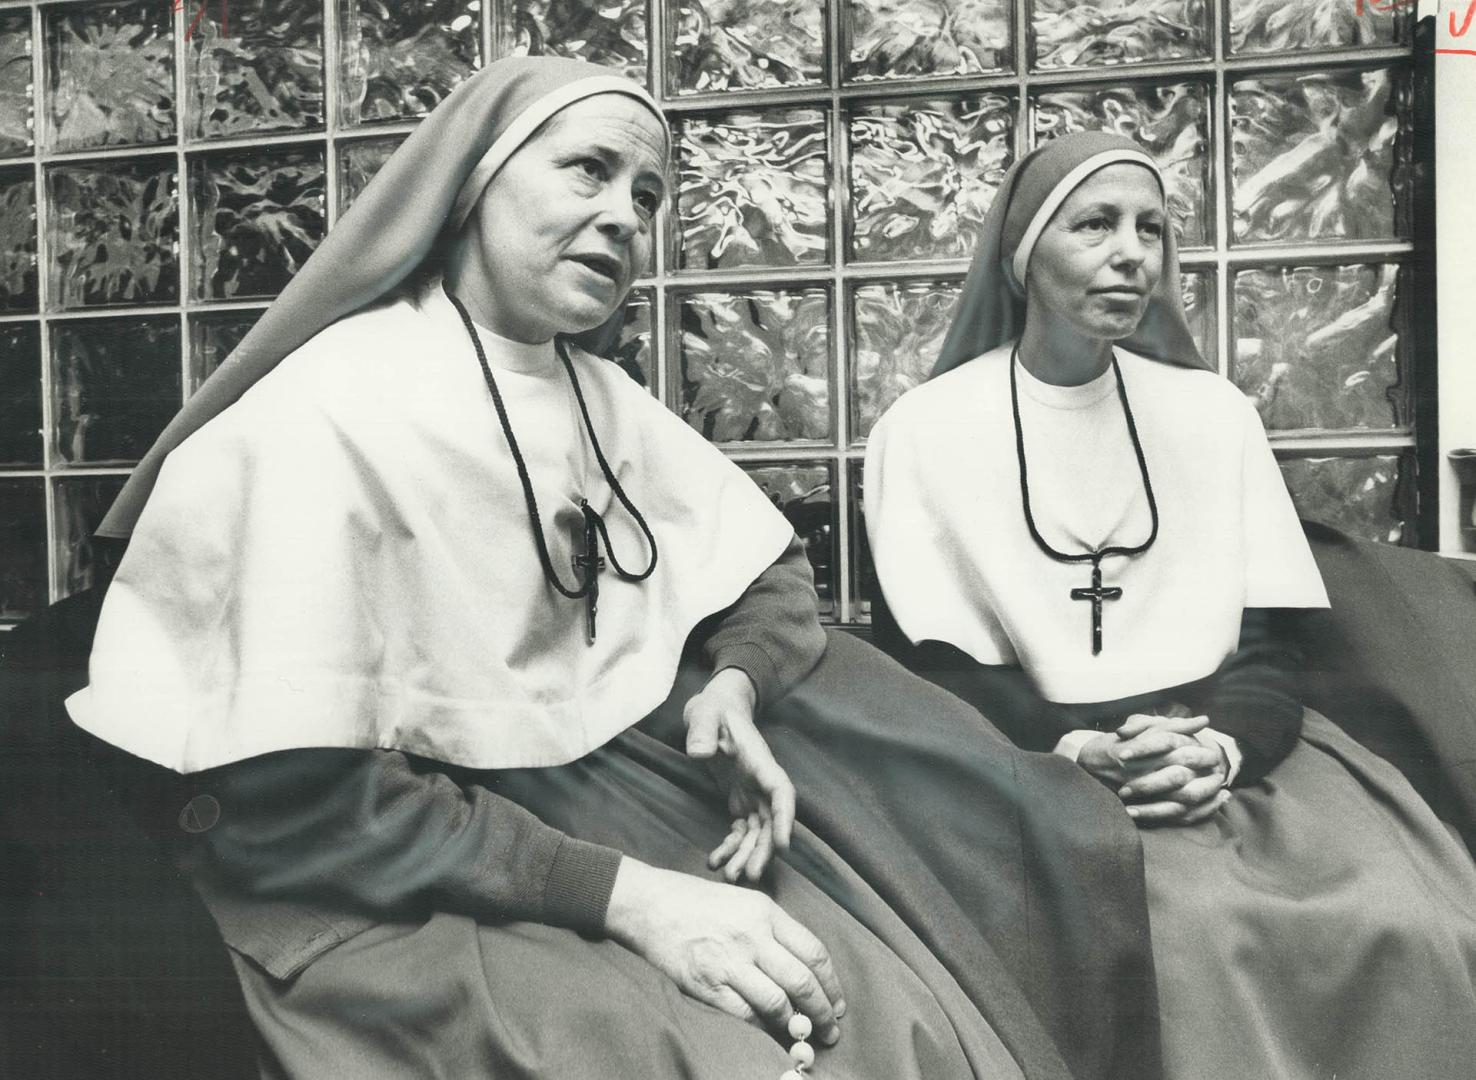 Sister Aimee (right) of The Apostles of Infinite Love, a dissident, Quebec-based religious order, seated with Sister Claire, told The Star six followe(...)